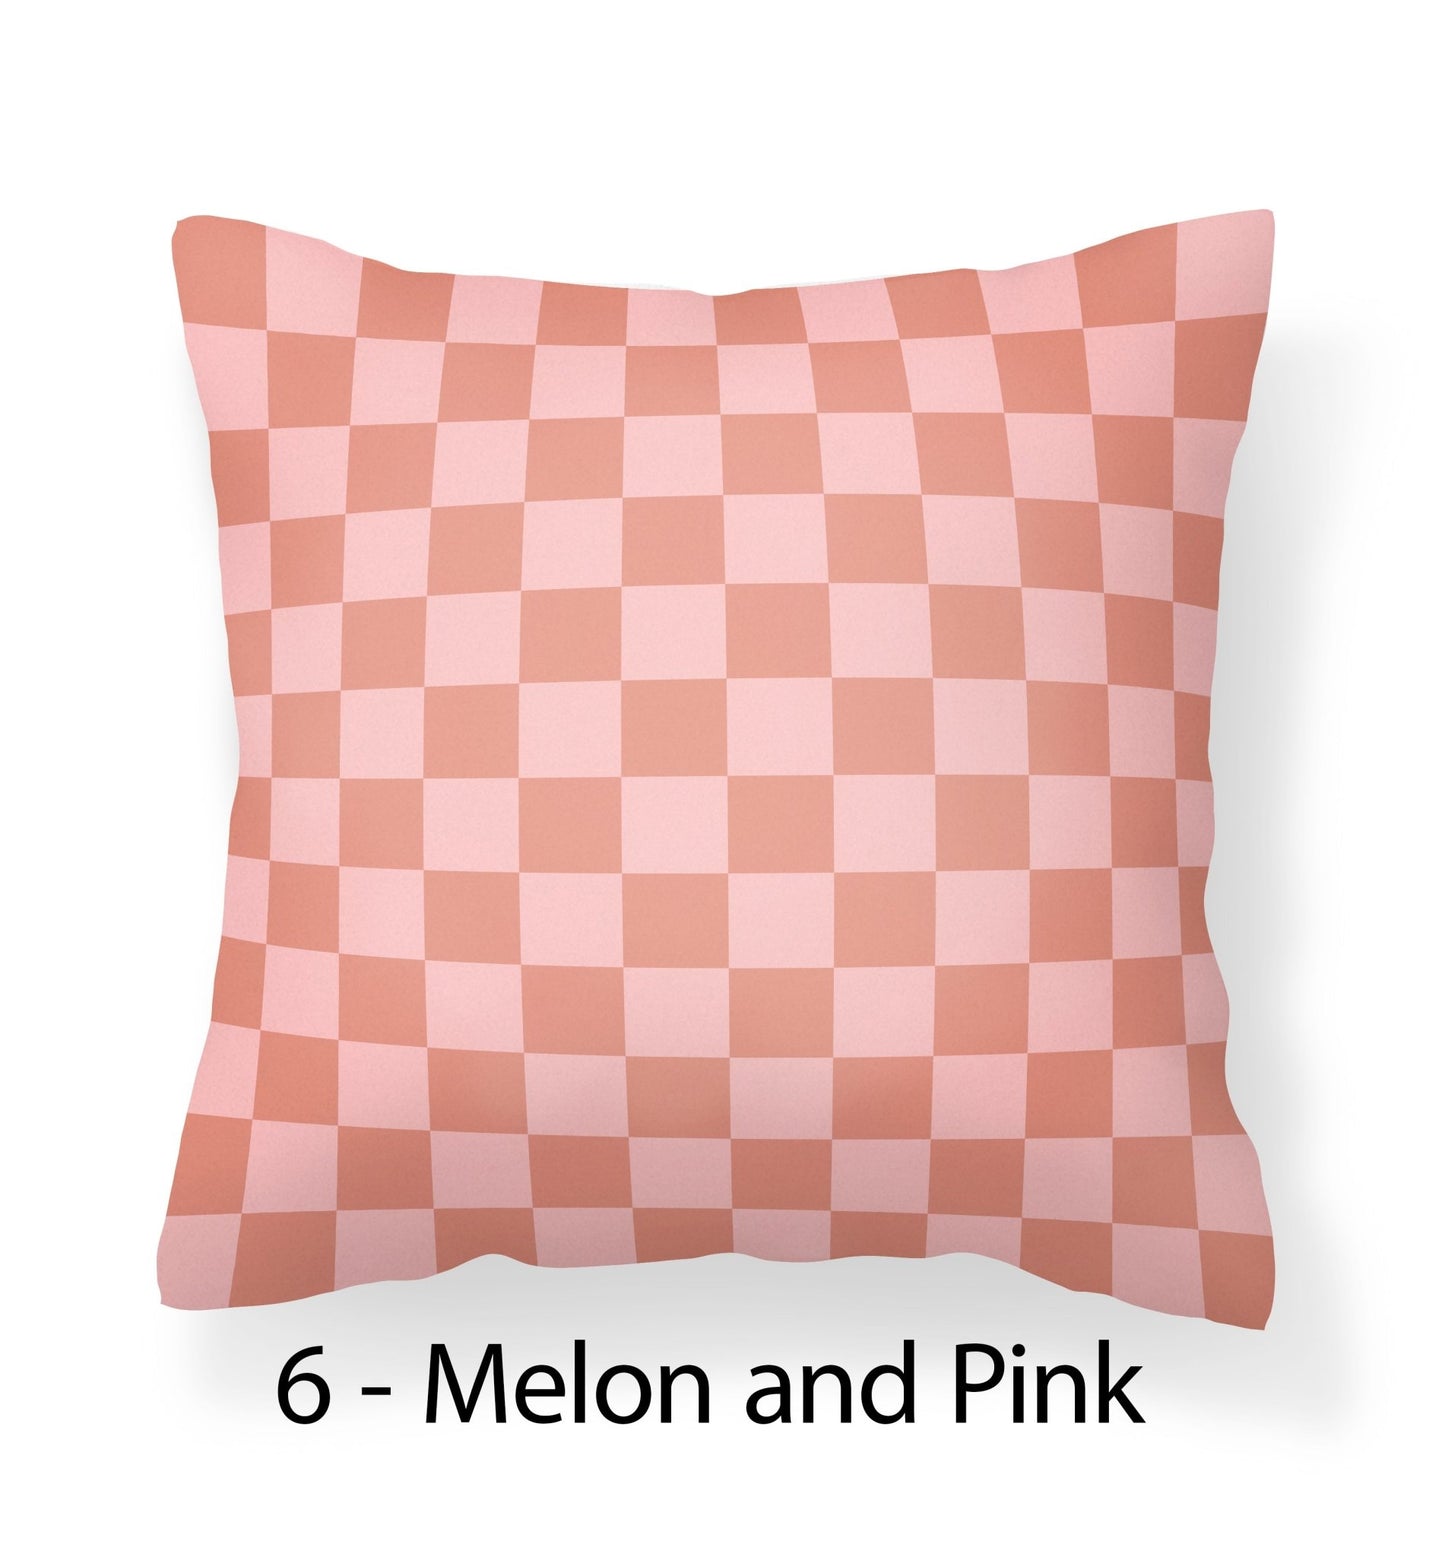 Checked Pillow Covers - Black, White, Green, Coral, Tan and Pink